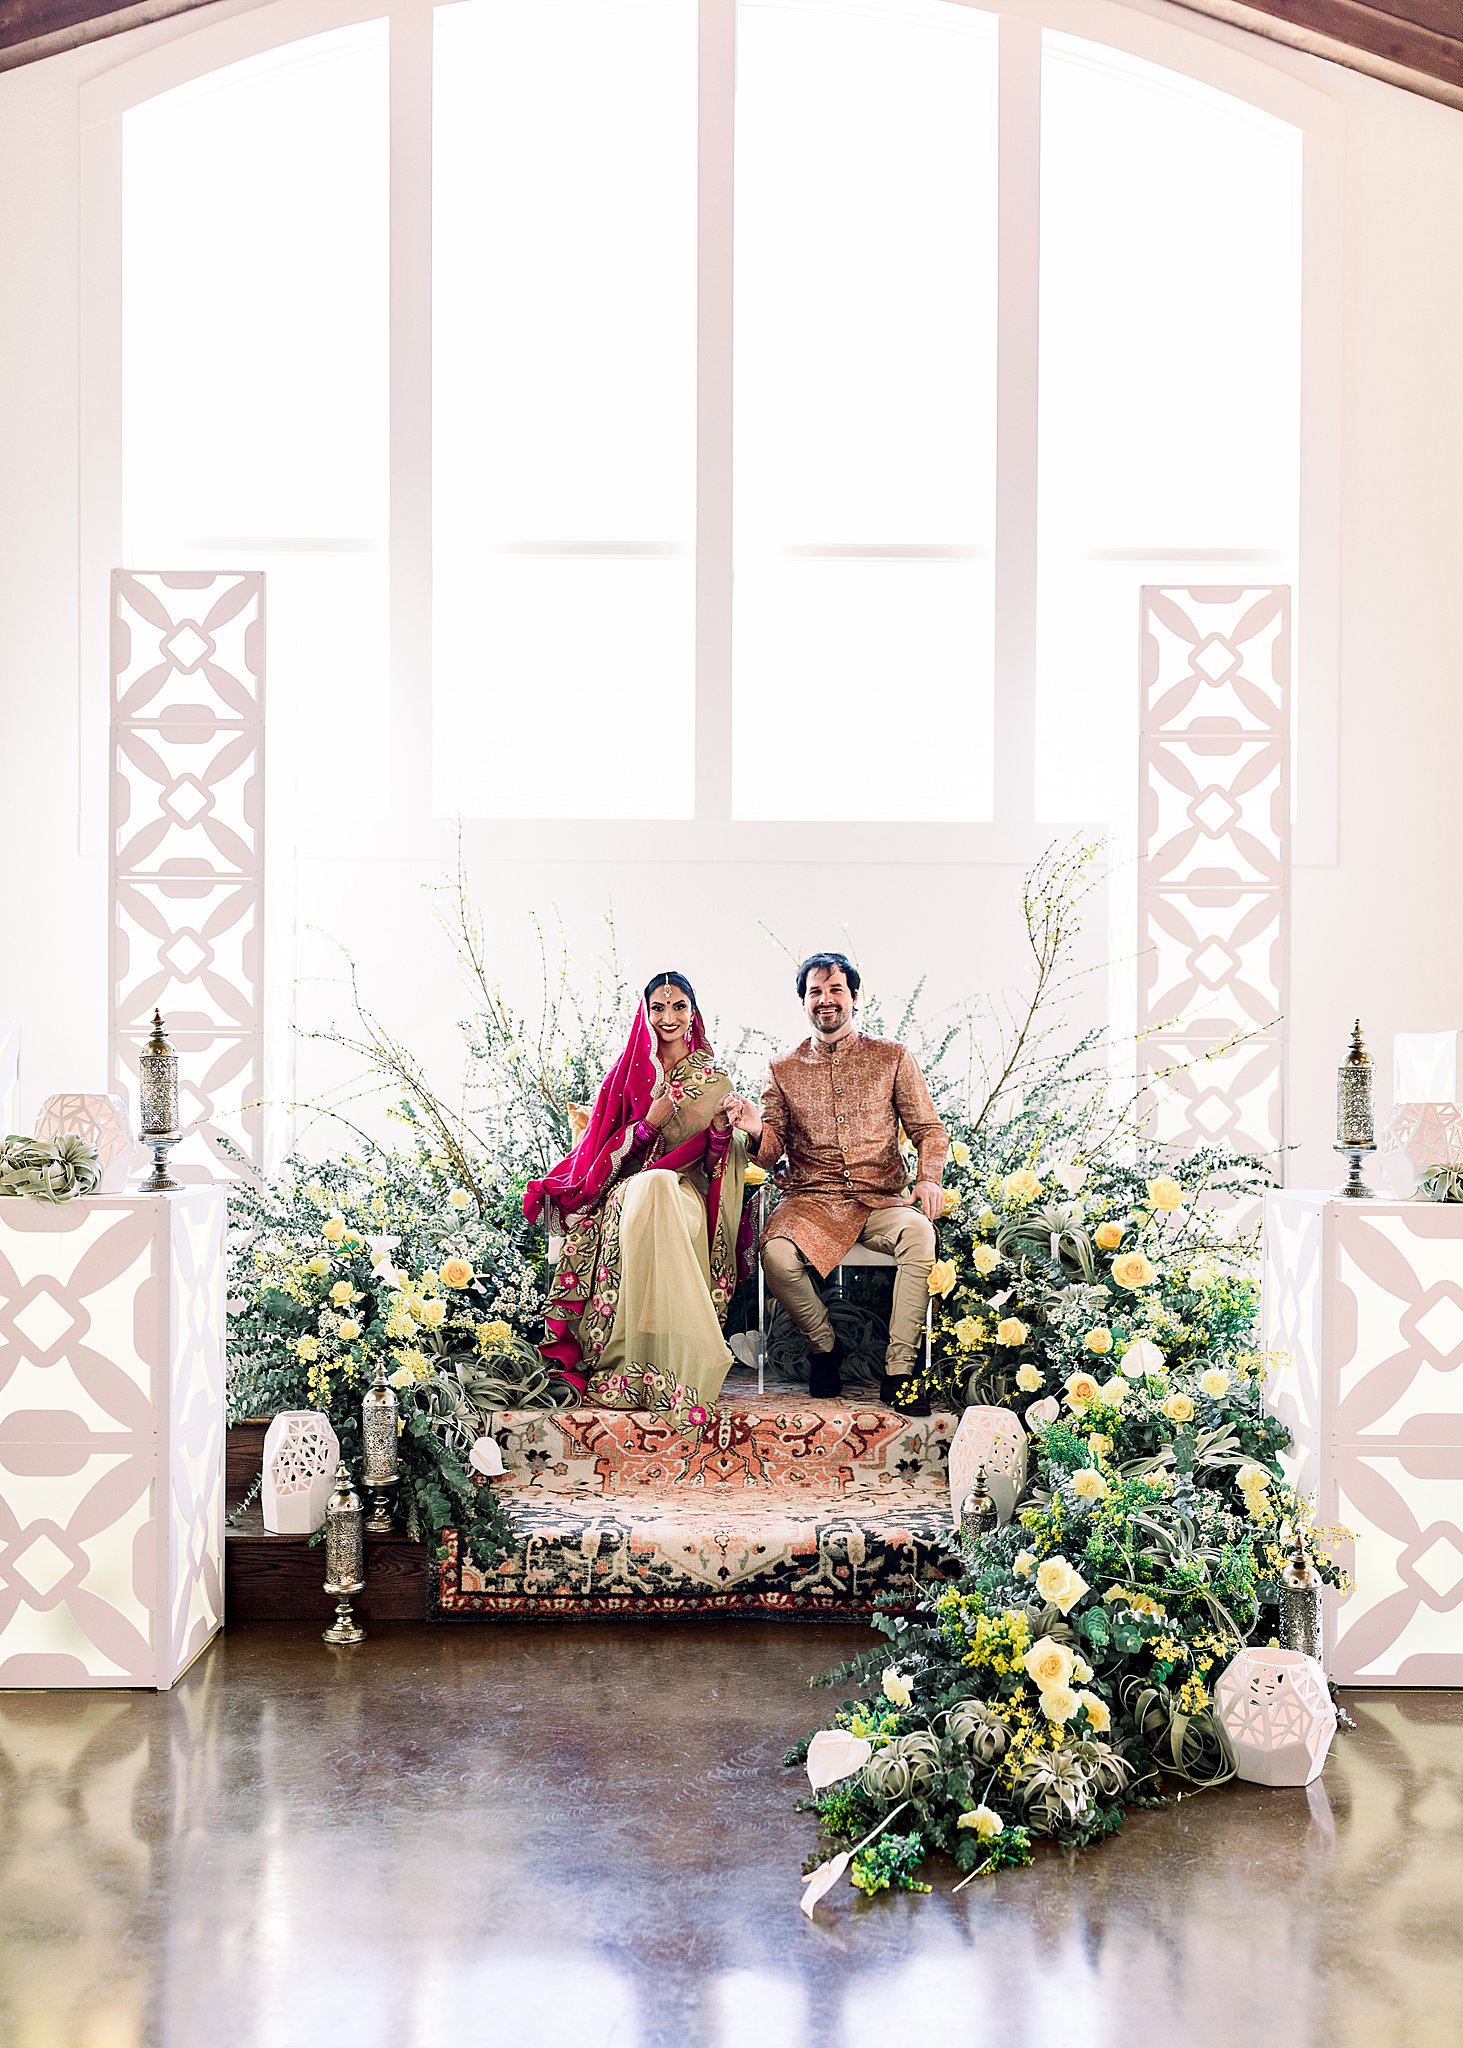 Sitting bride and groom on stage with yellow and green wedding florals in Sherwani and lehenga